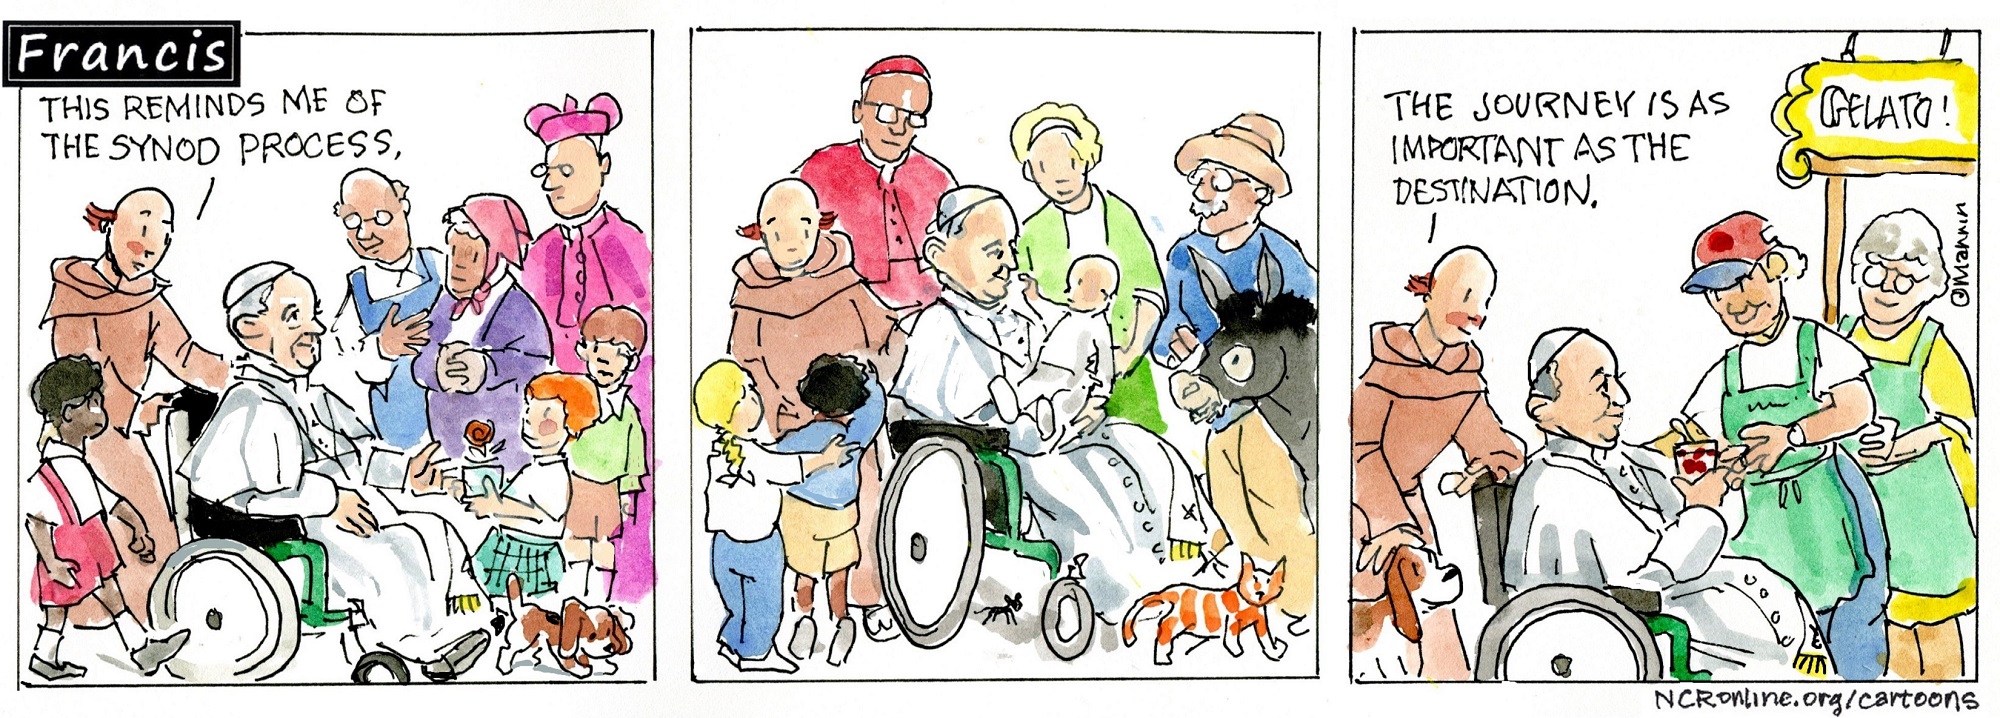 Francis, the comic strip: For Francis, the synod is a journey.